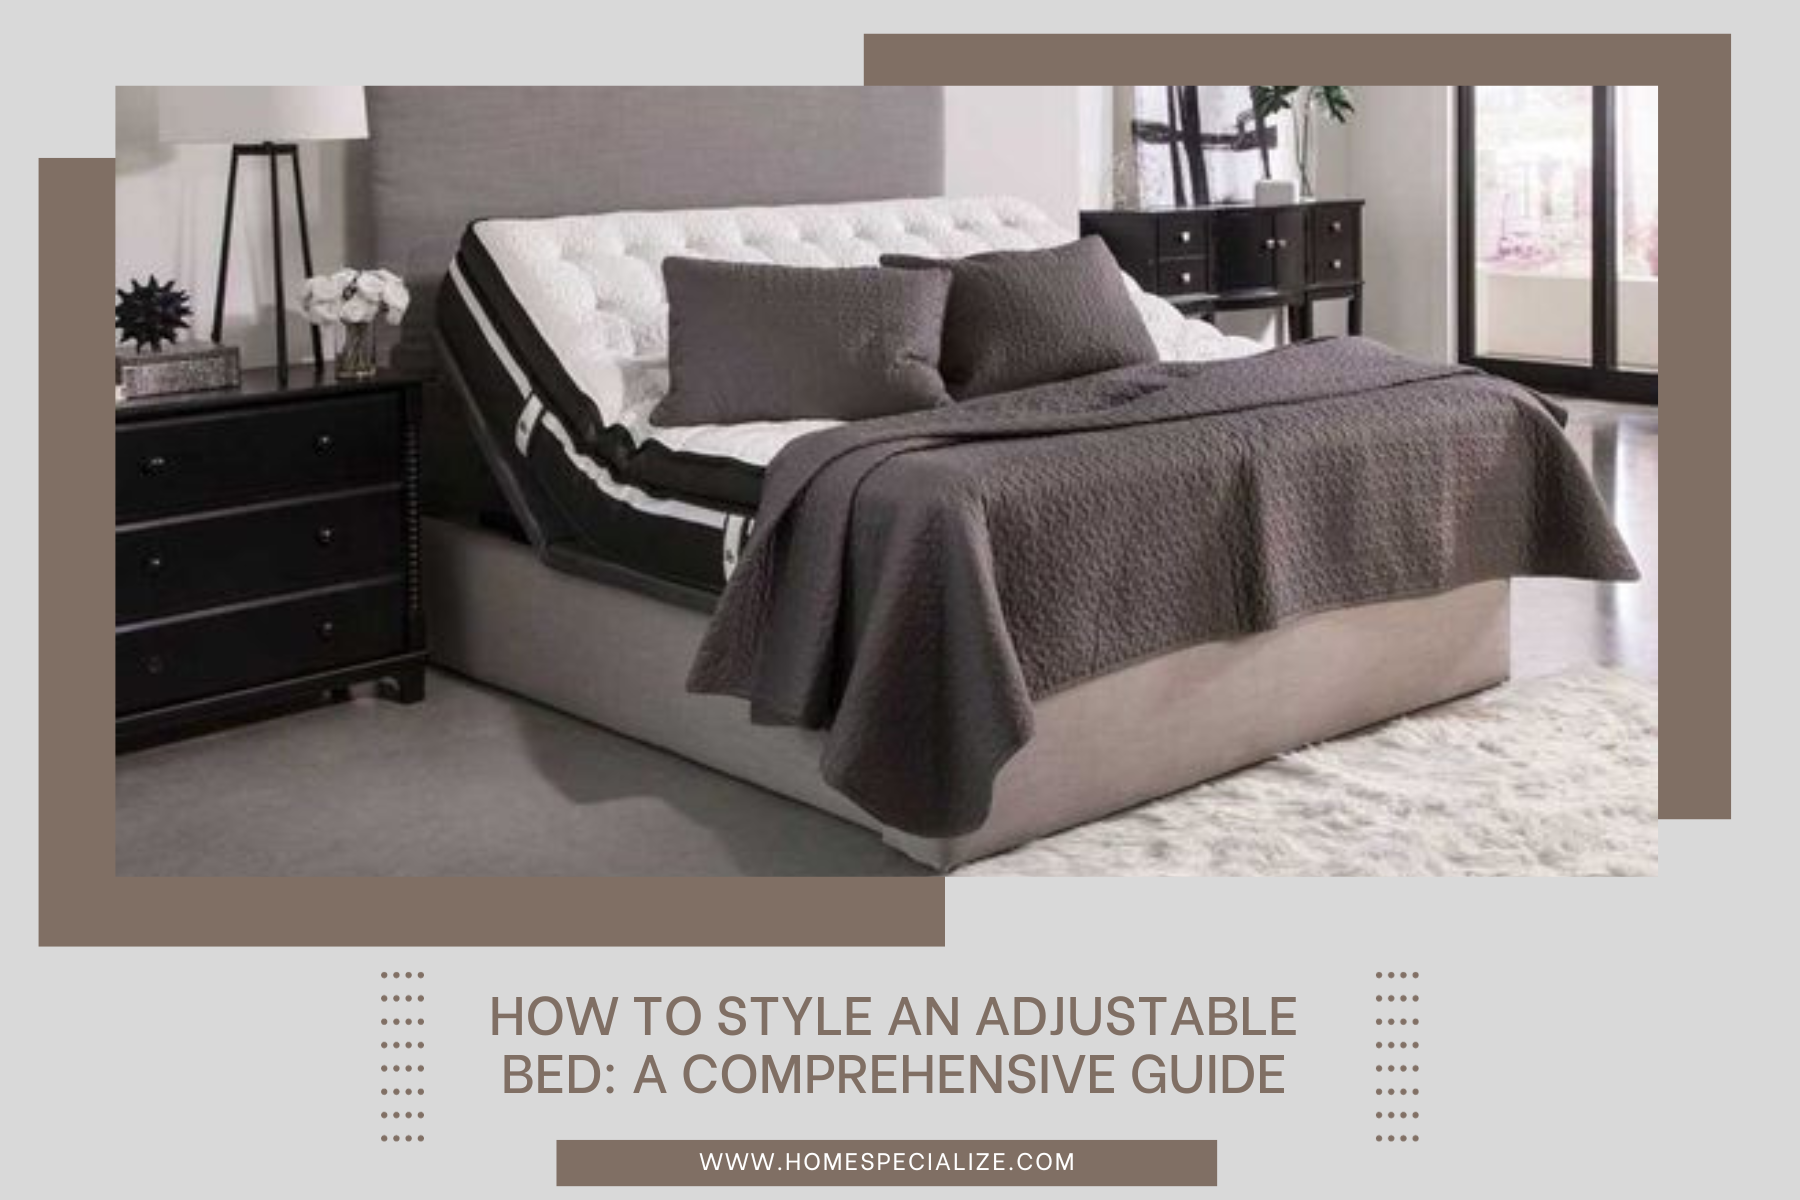 How to Style an Adjustable Bed: A Comprehensive Guide